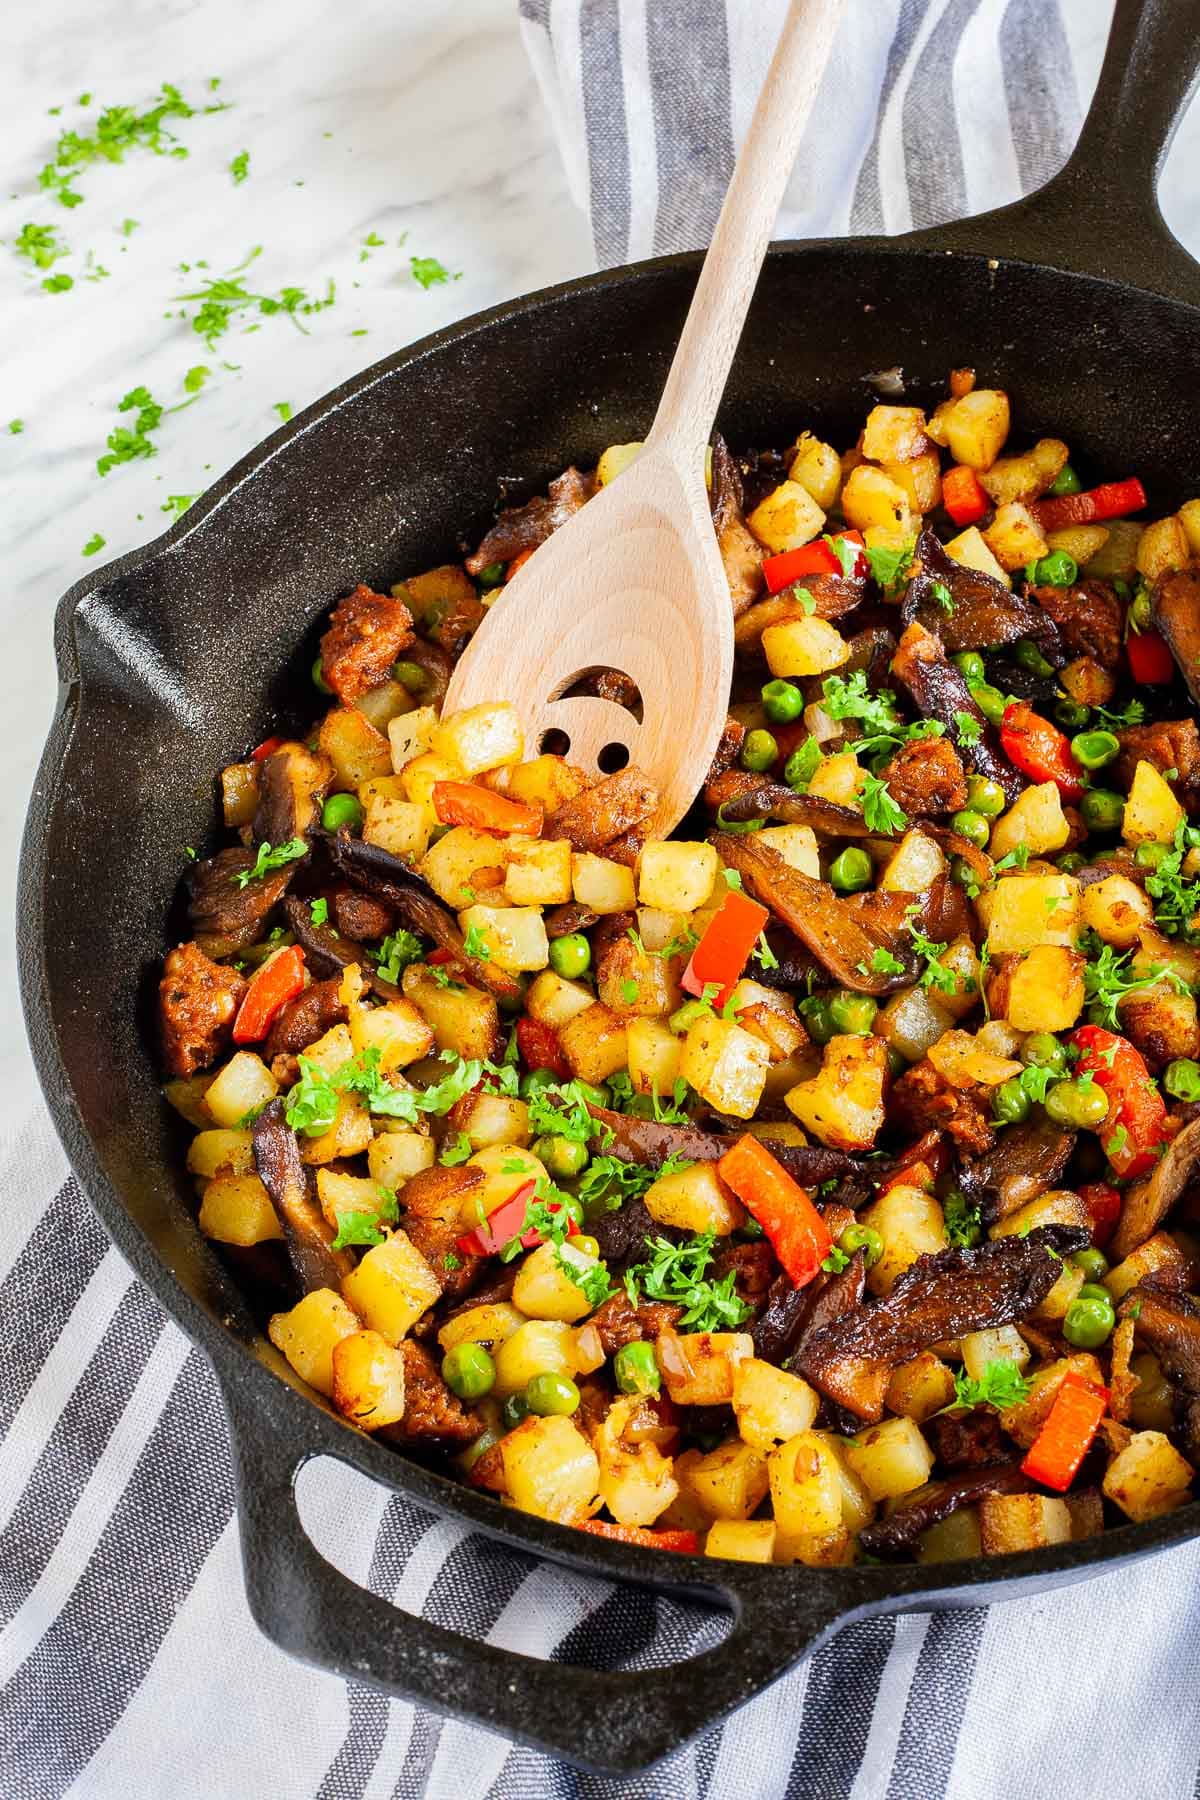 Black cast iron skillet from above with a wooden spatula and colorful chopped veggies like green peas, red bell pepper, yellow potatoes, brown mushroom, fresh parsley